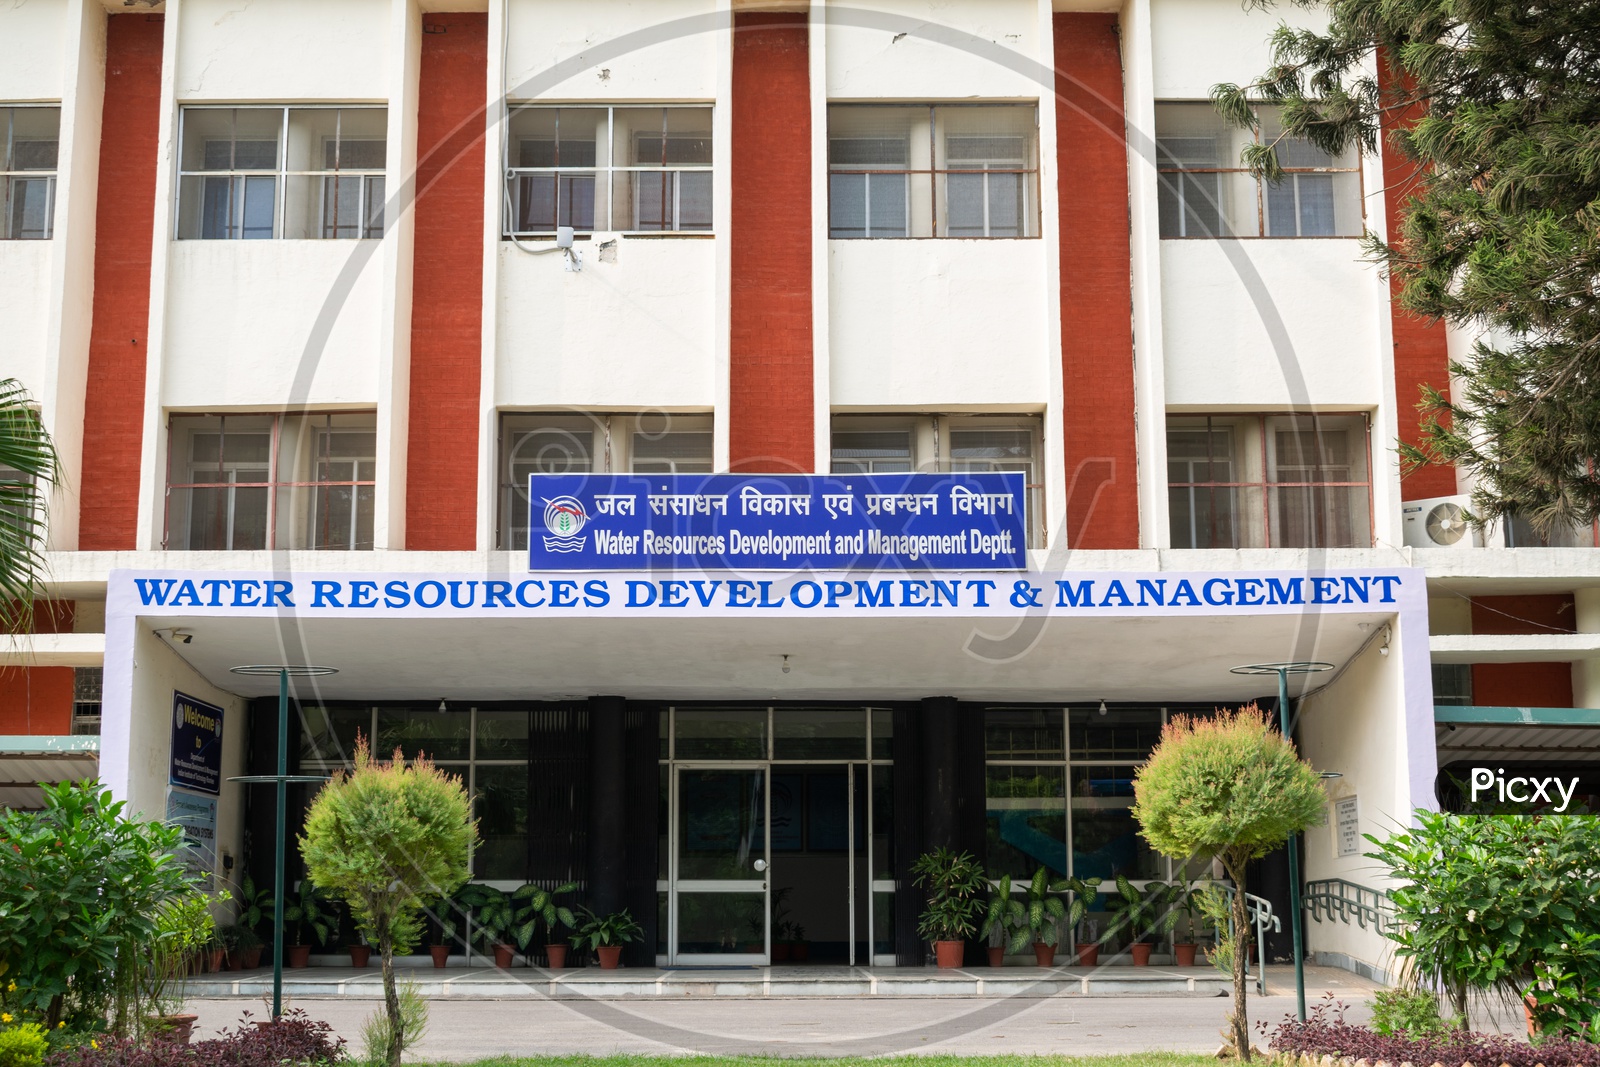 Department of Water Resources Development and Management, Indian Institute of Technology Roorkee (IIT Roorkee)